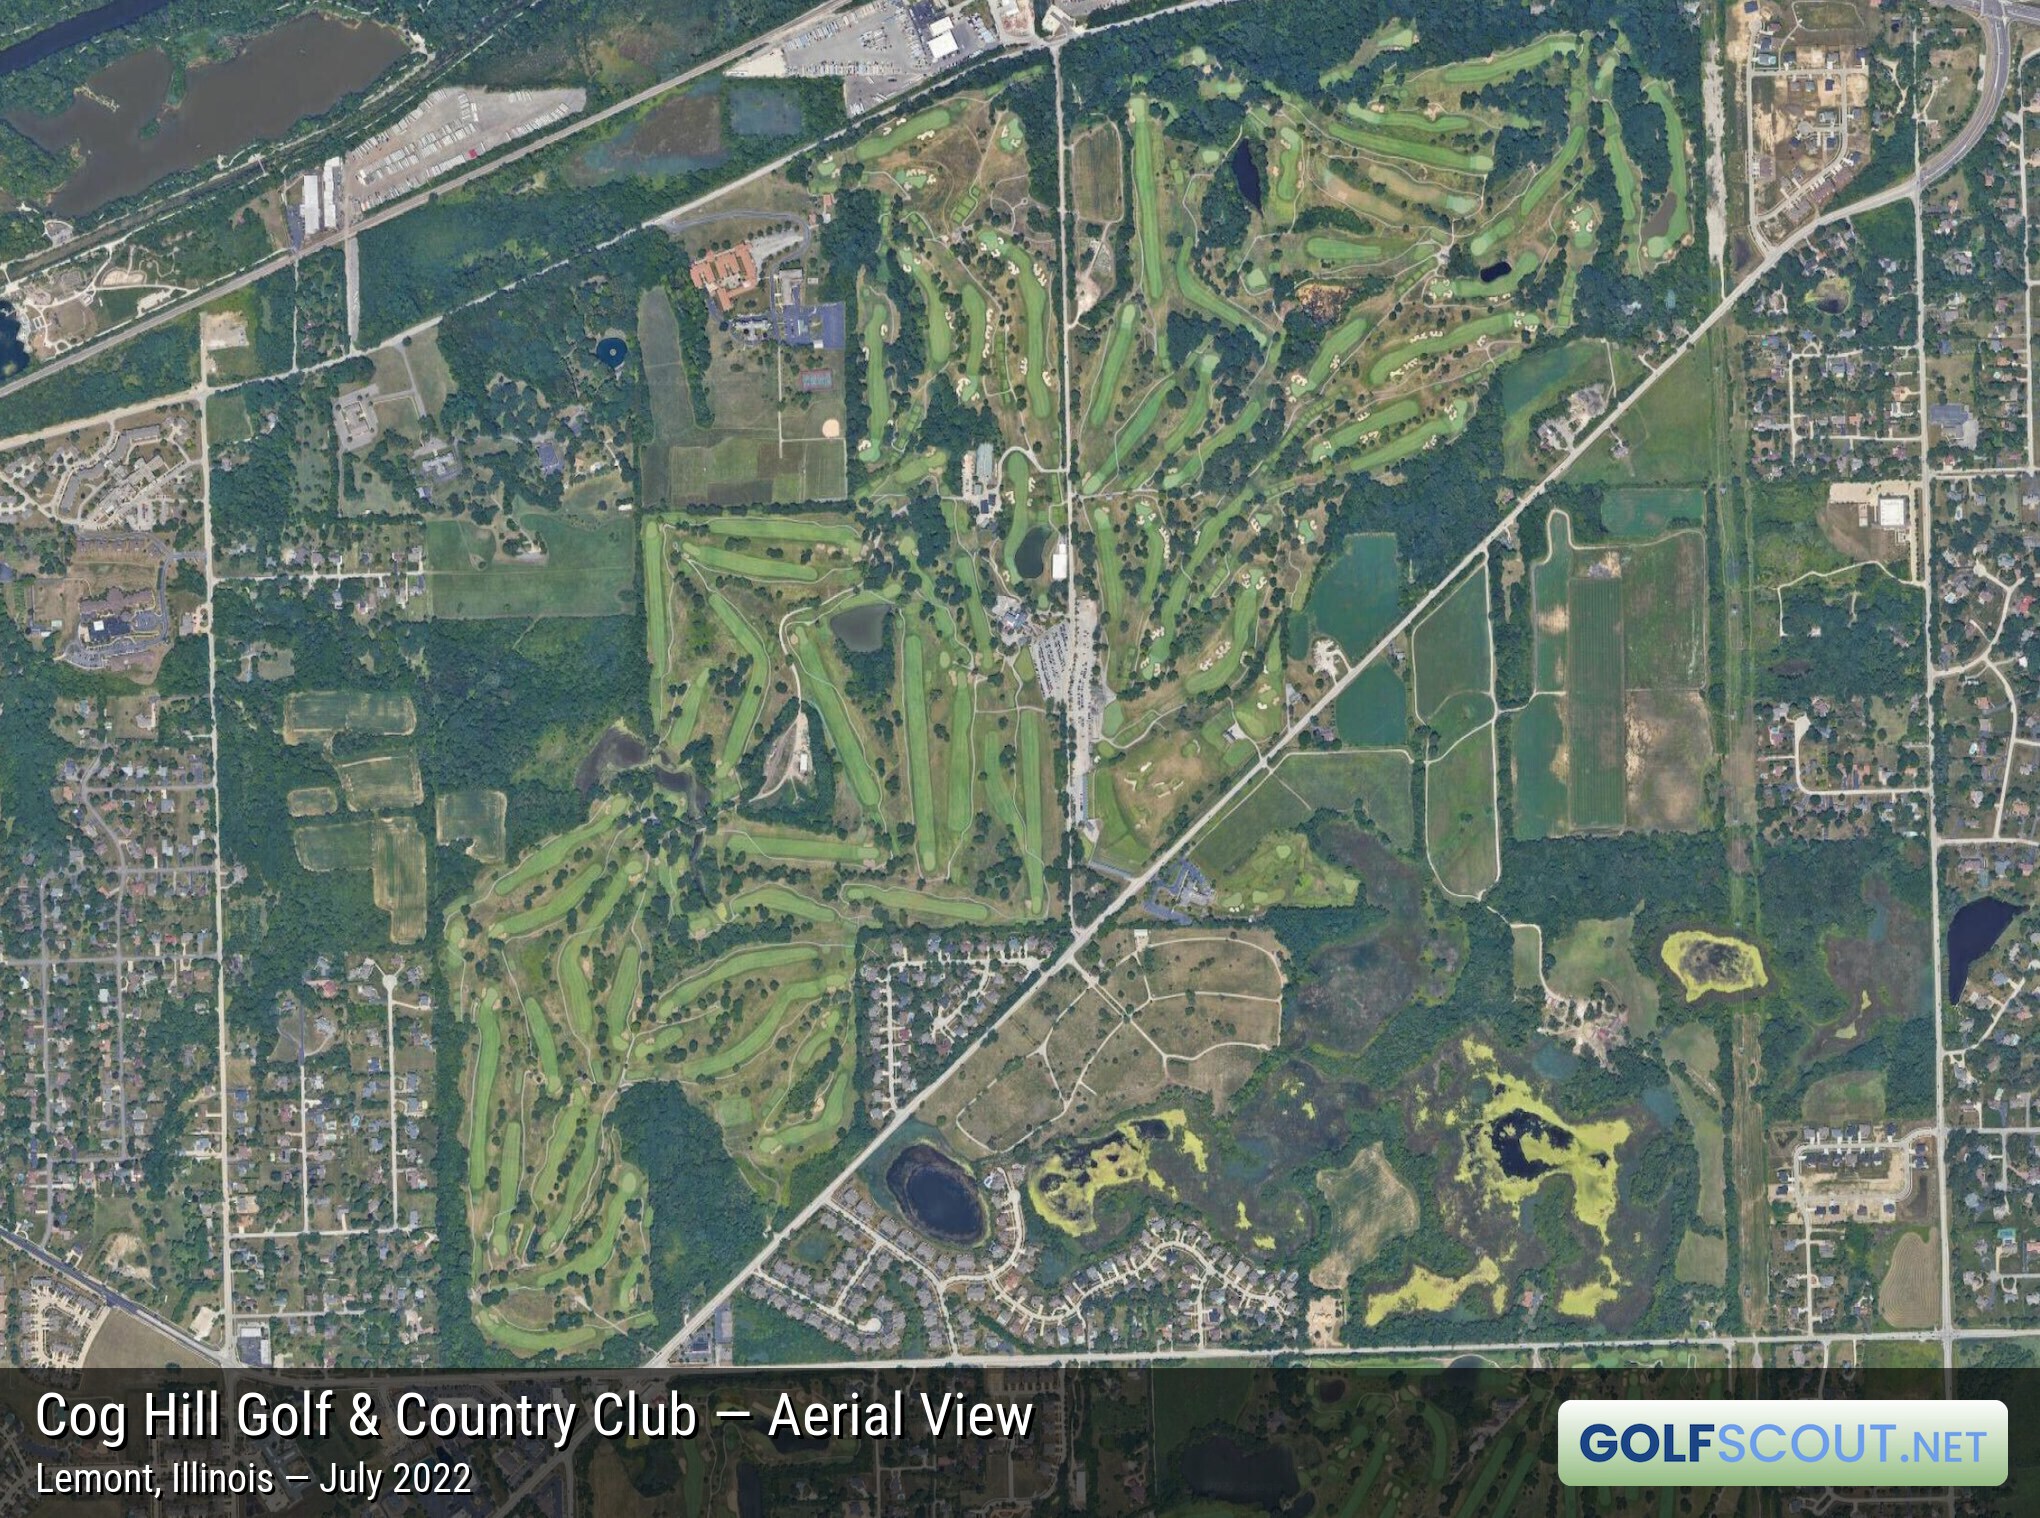 Aerial satellite imagery of Cog Hill Course #3 in Lemont, Illinois. Cog Hill has 4 courses. Course 1 and 3 intertwine in the southwest portion of the property. Image courtesy of Google Maps.